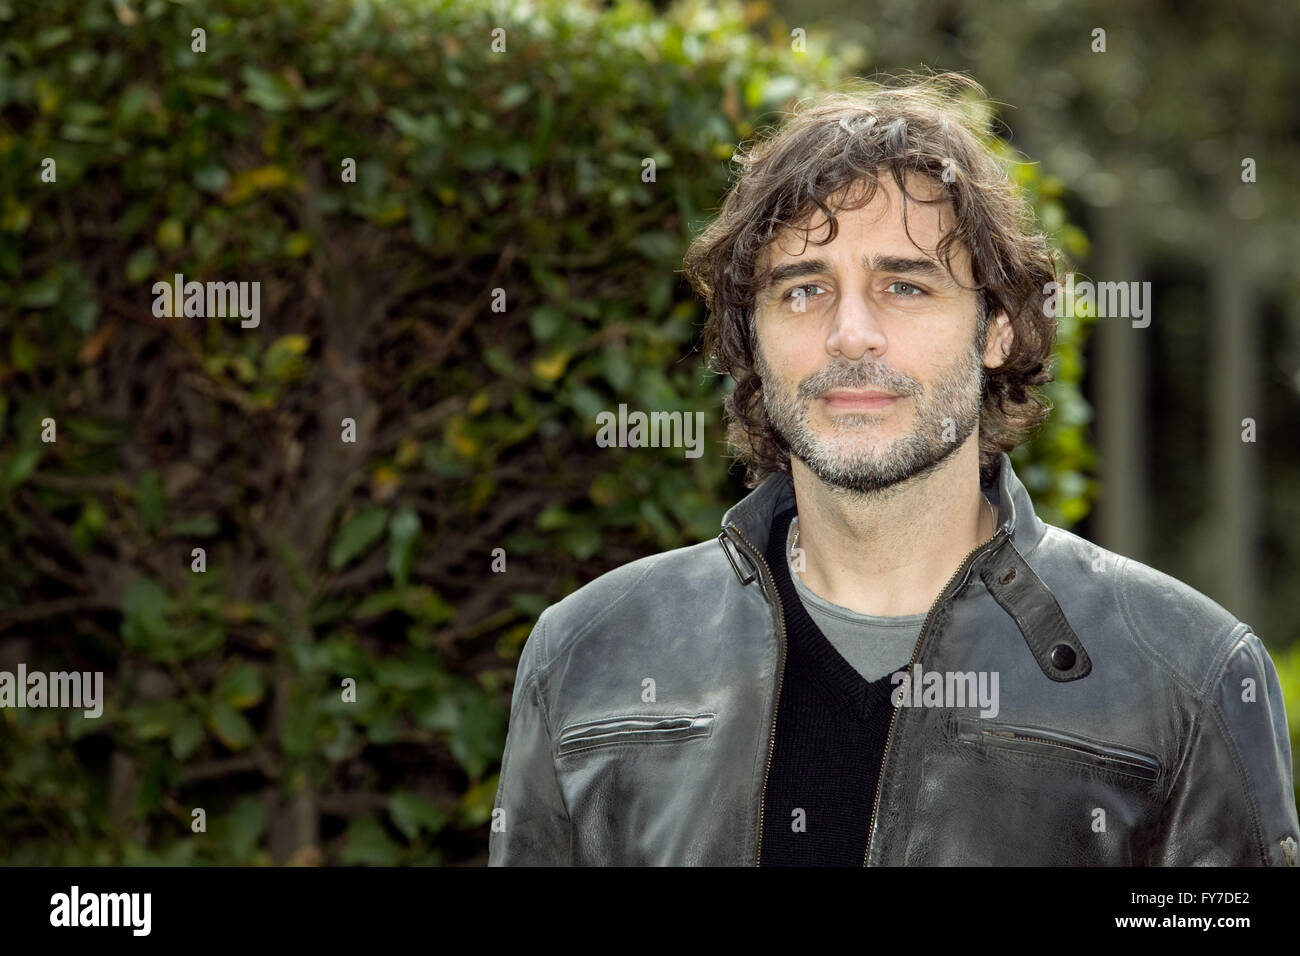 Photocall of 'How do you wrong' in Rome  Featuring: Daniele Pecci Where: Rome, Italy When: 16 Mar 2016 Credit: IPA/WENN.com  **Only available for publication in UK, USA, Germany, Austria, Switzerland** Stock Photo